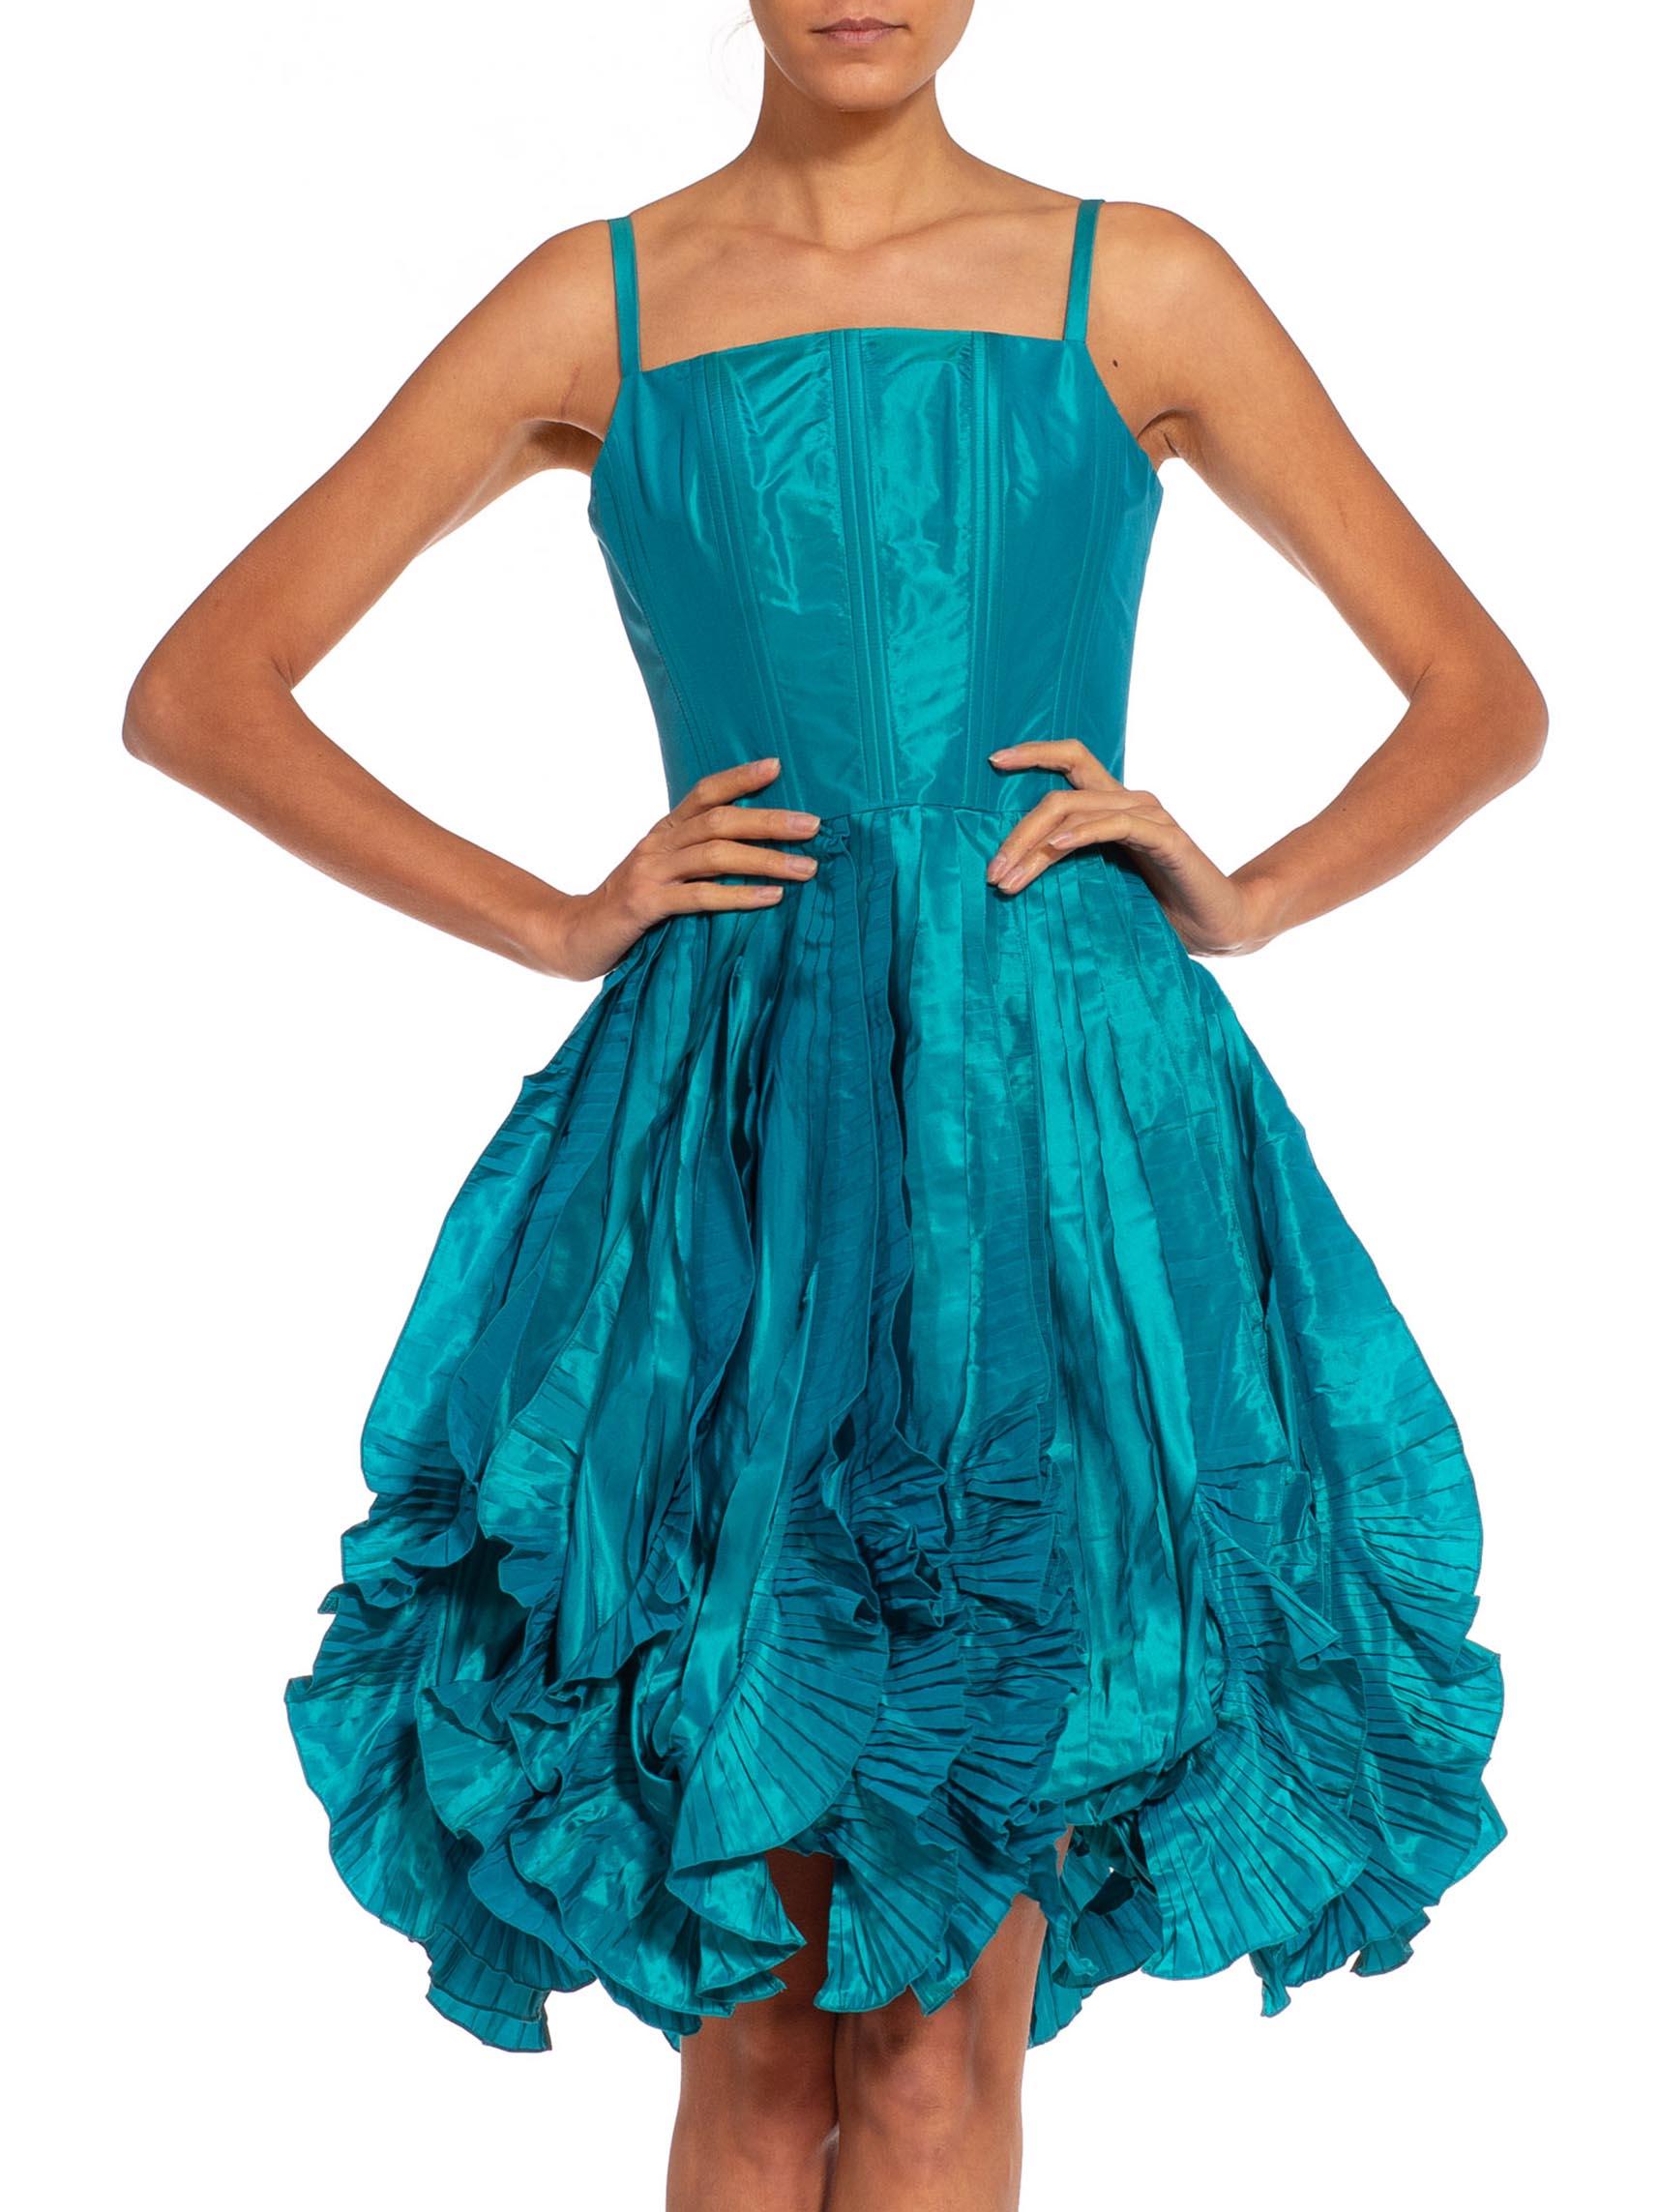 2000S Oscar De La Renta Teal Silk Taffeta Pleated & Ruffled Balloon Skirt Cockt In Excellent Condition For Sale In New York, NY